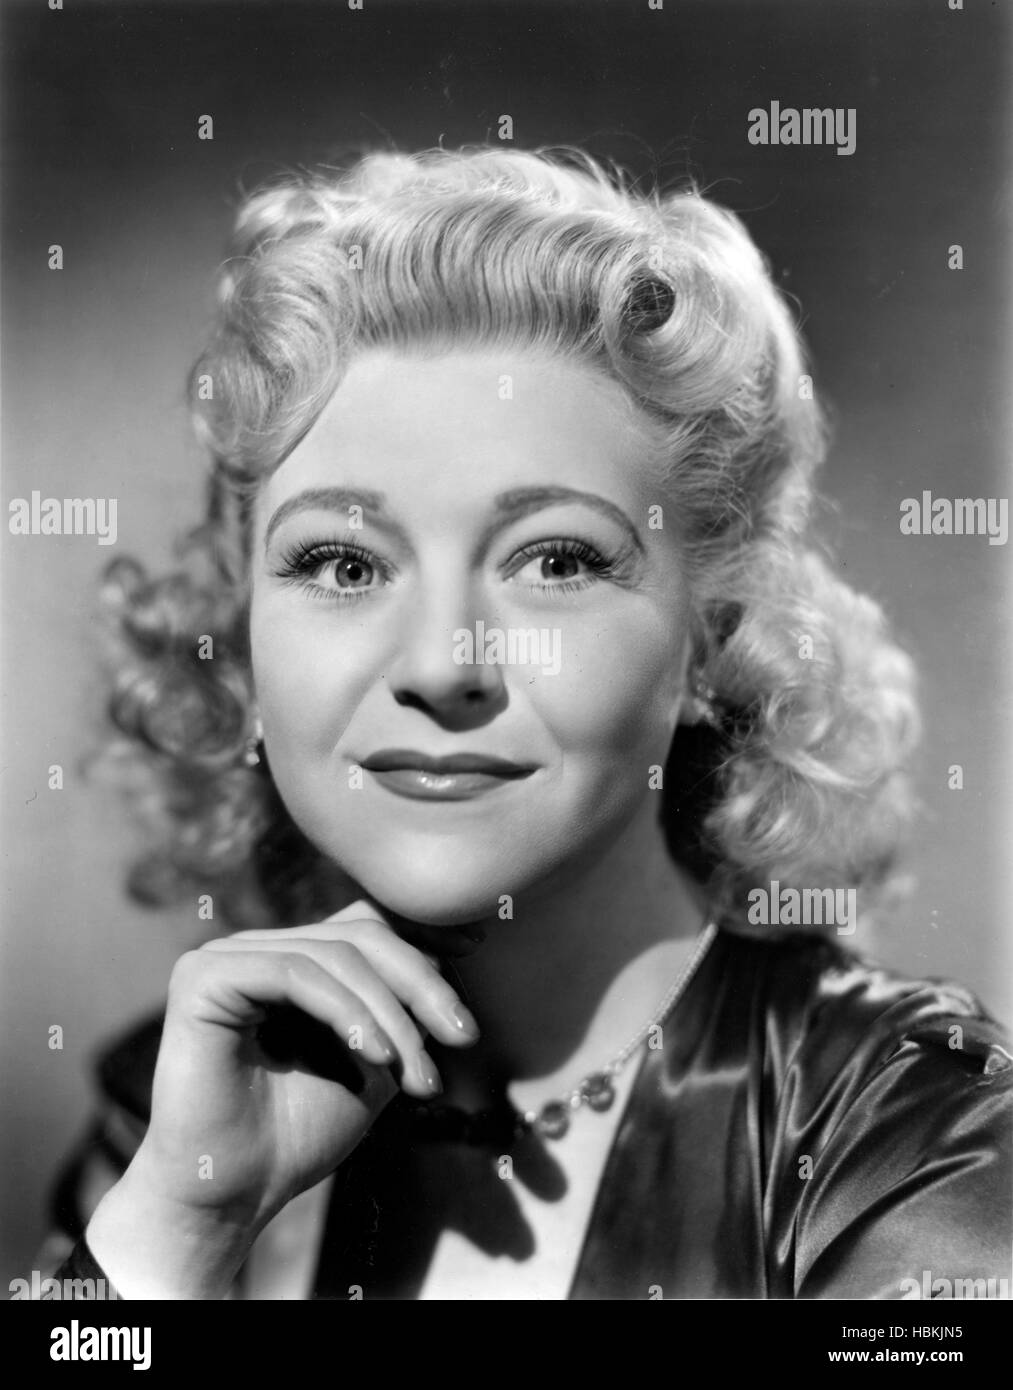 THE CURE FOR LOVE, Dora Bryan, 1949 Stock Photo - Alamy